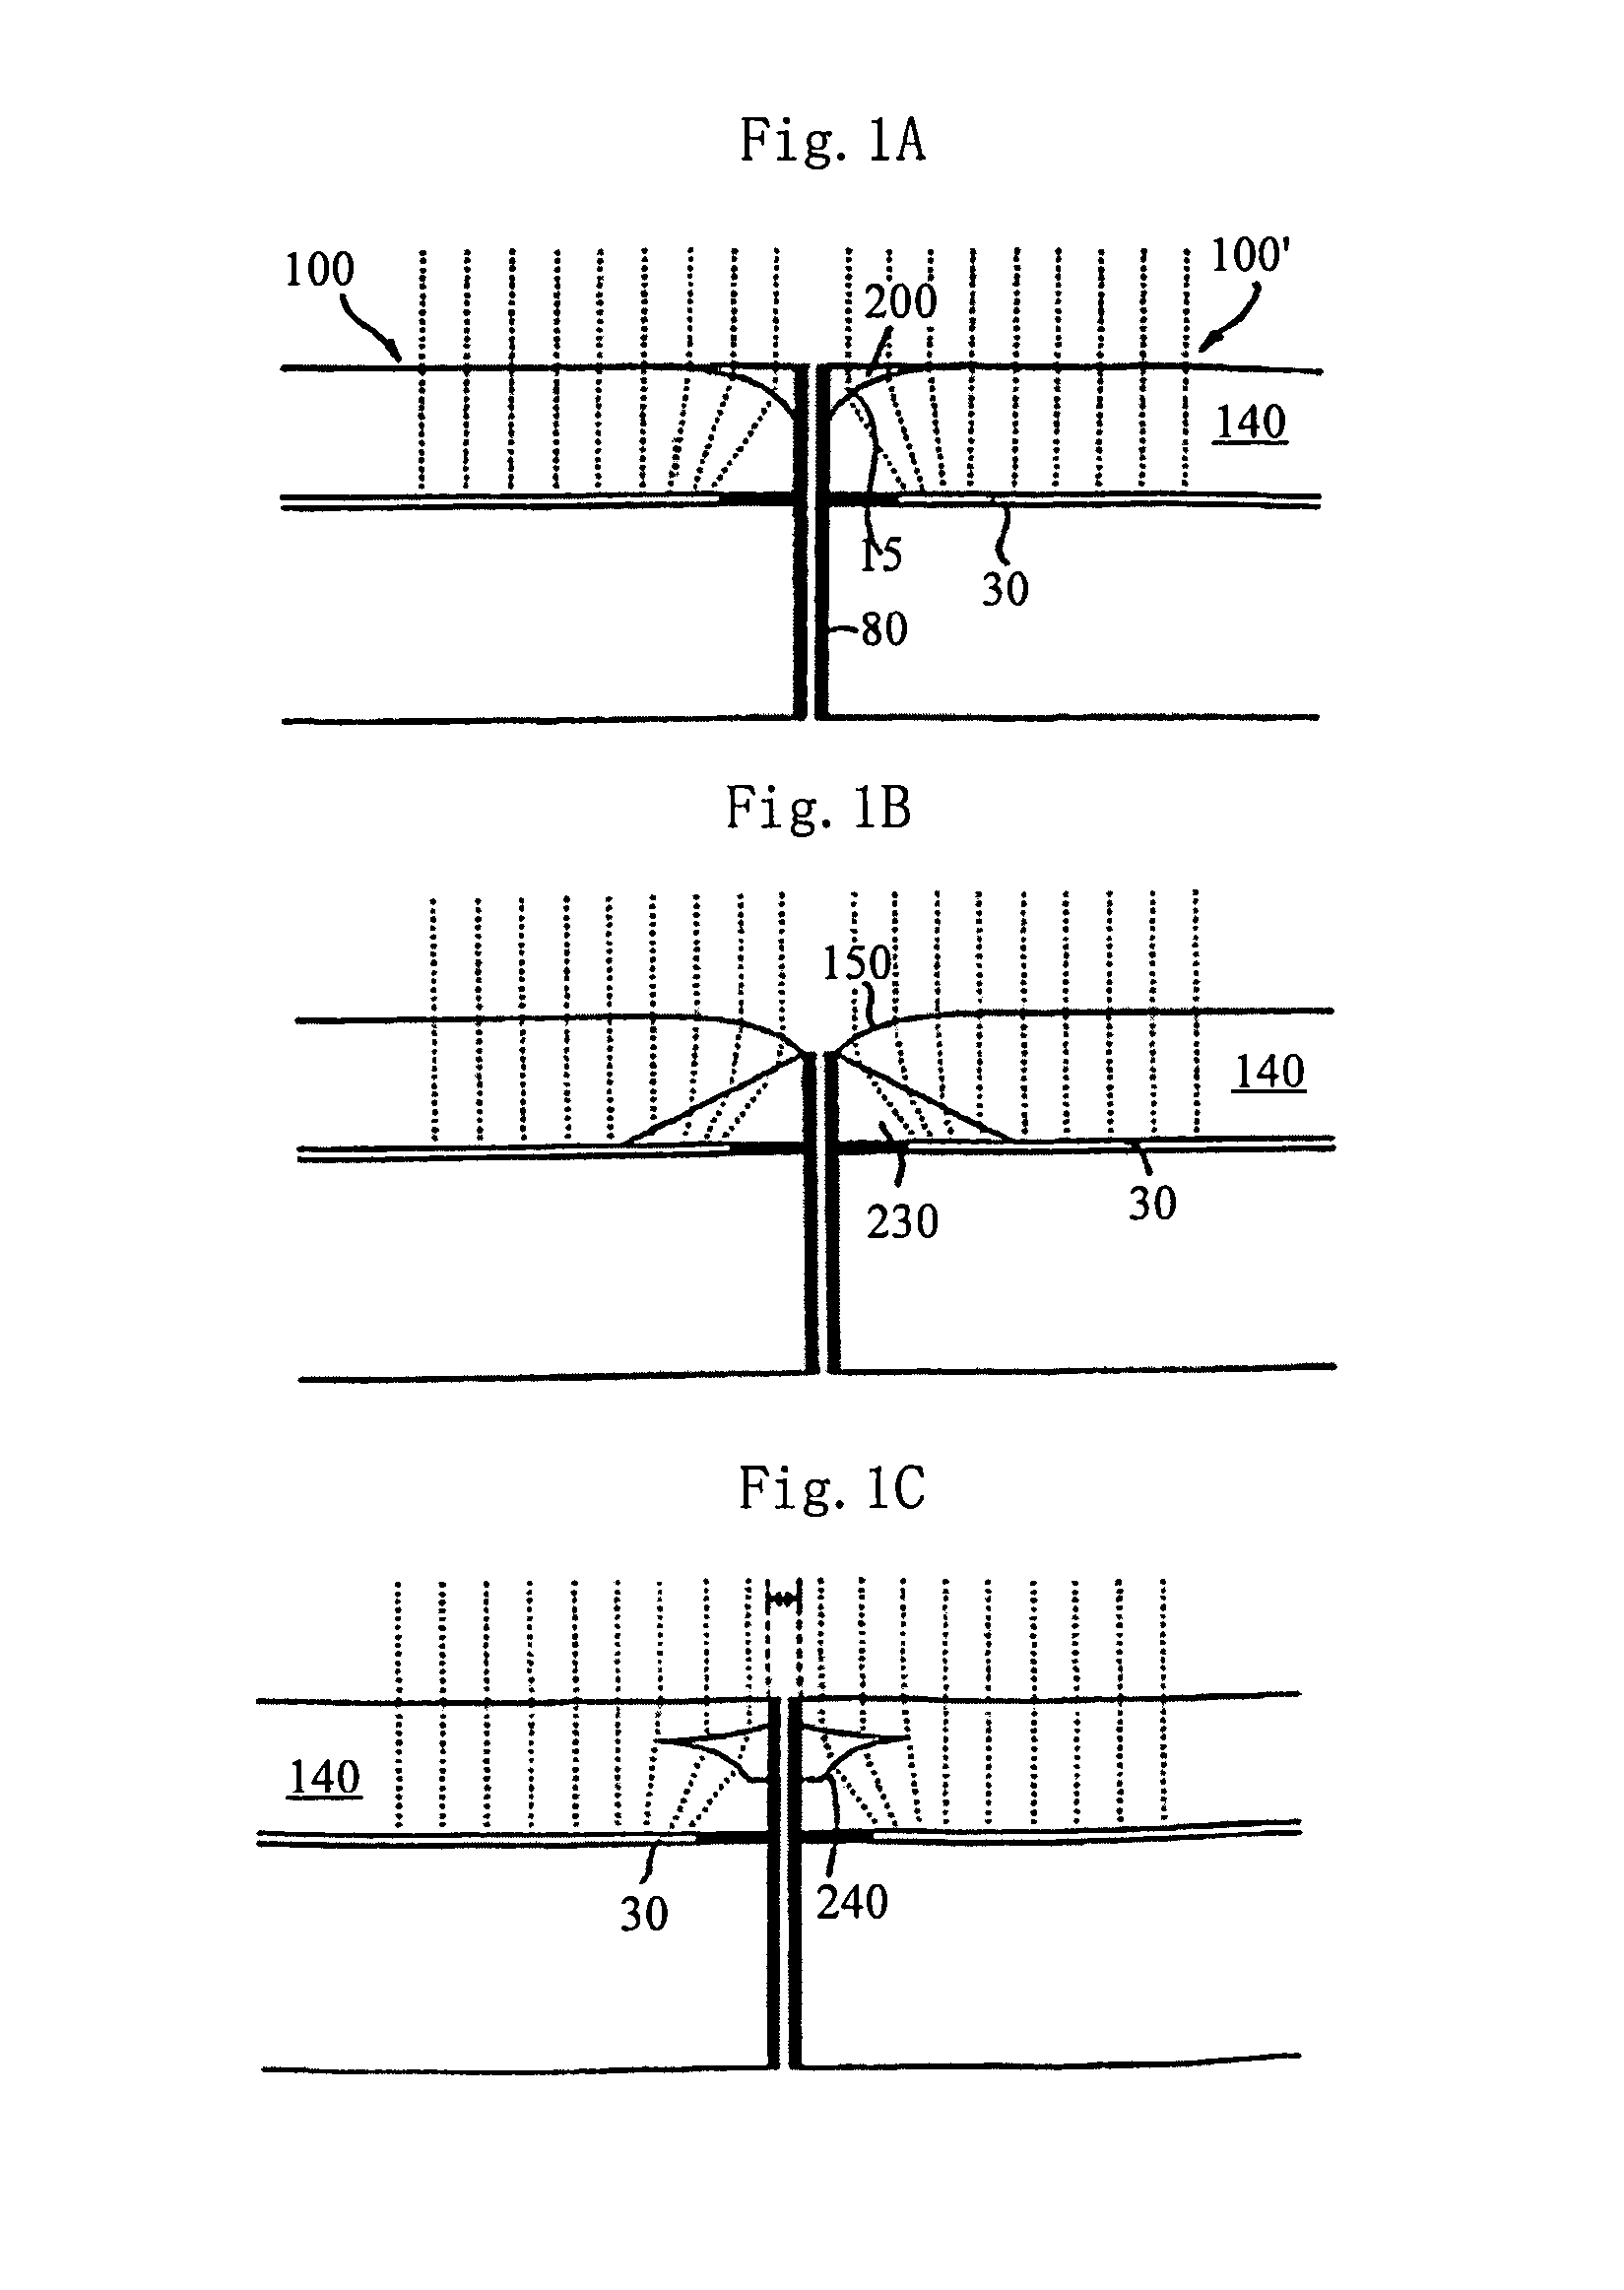 Method and apparatus for eliminating seam between adjoined screens